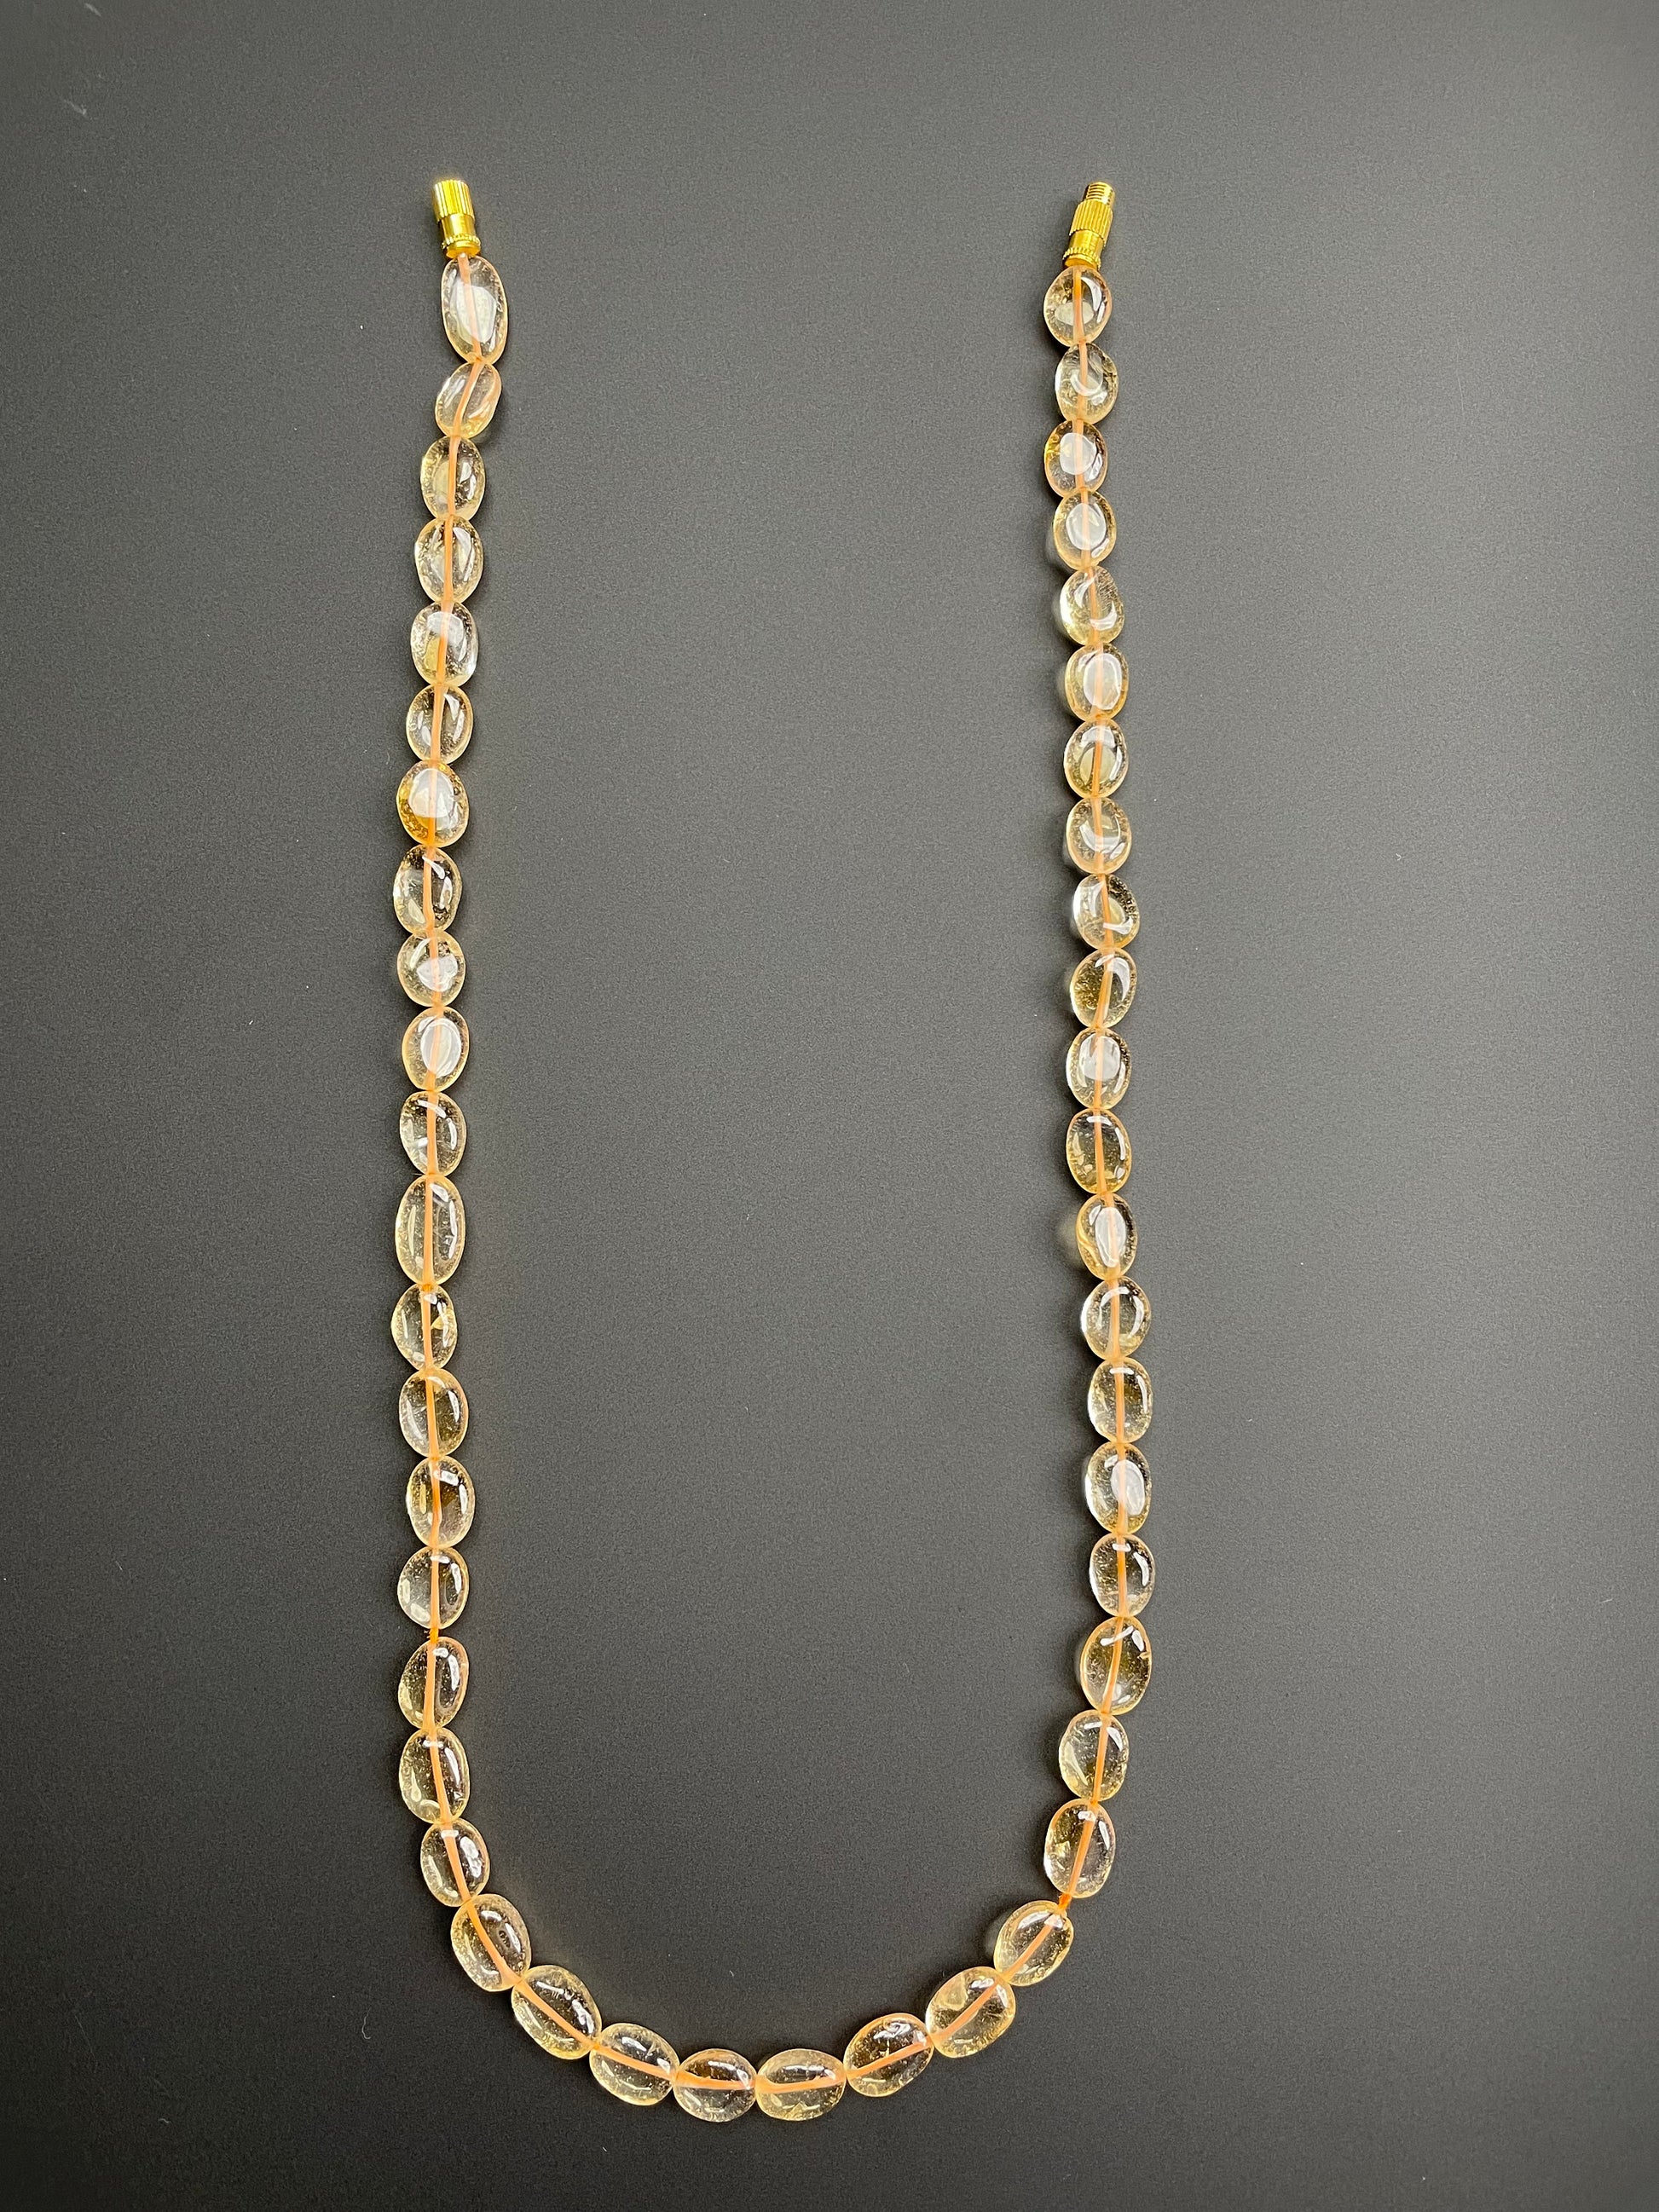 Natural Citrine Oval shaped Beads